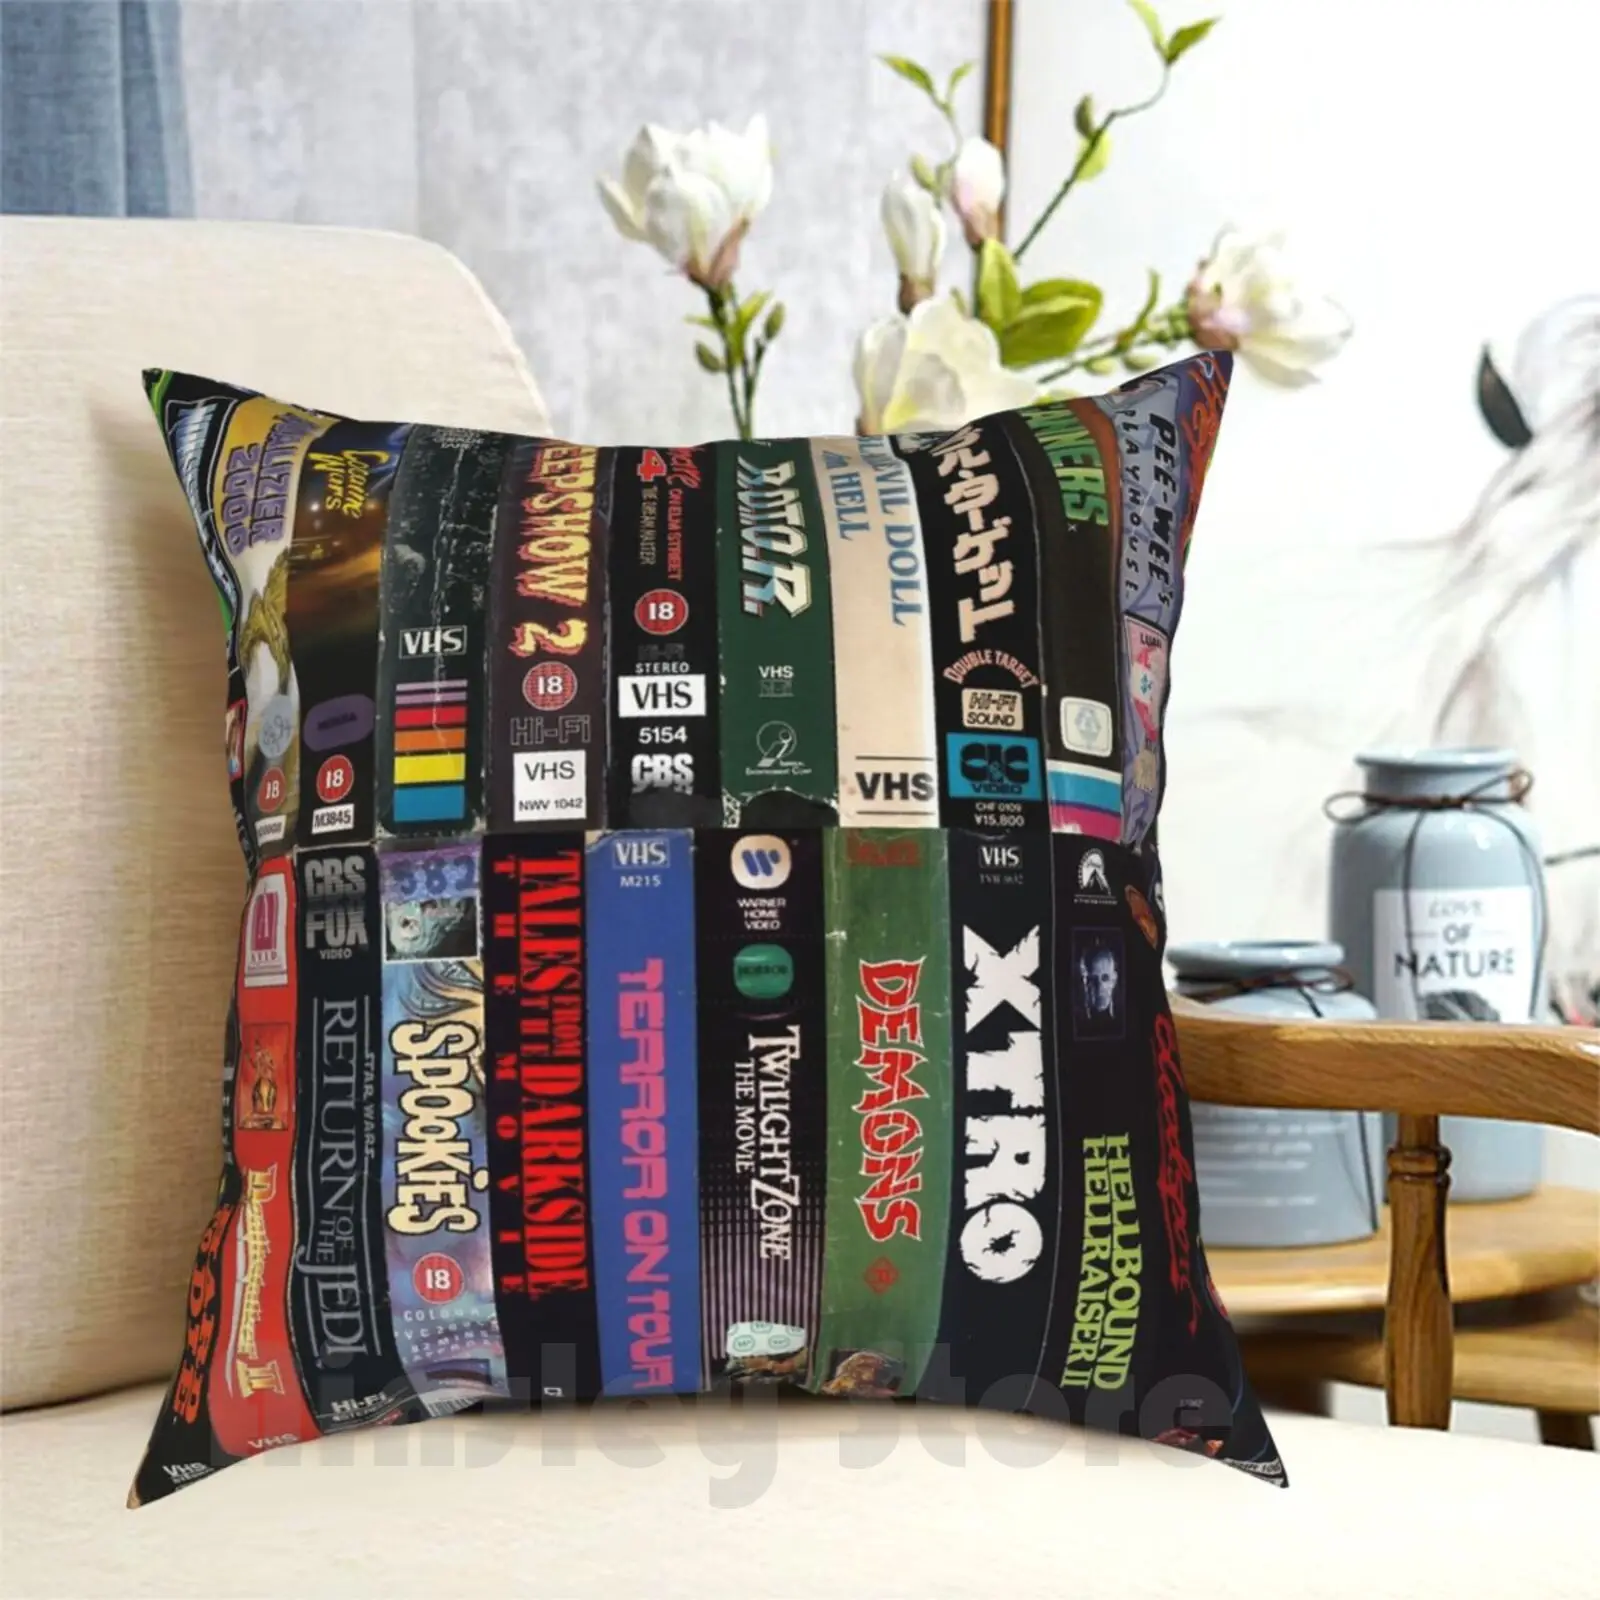 

Vhs Collection Pillow Case Printed Home Soft DIY Pillow cover Vhs Vcr 80S 90S Retro Movies Film Cinema